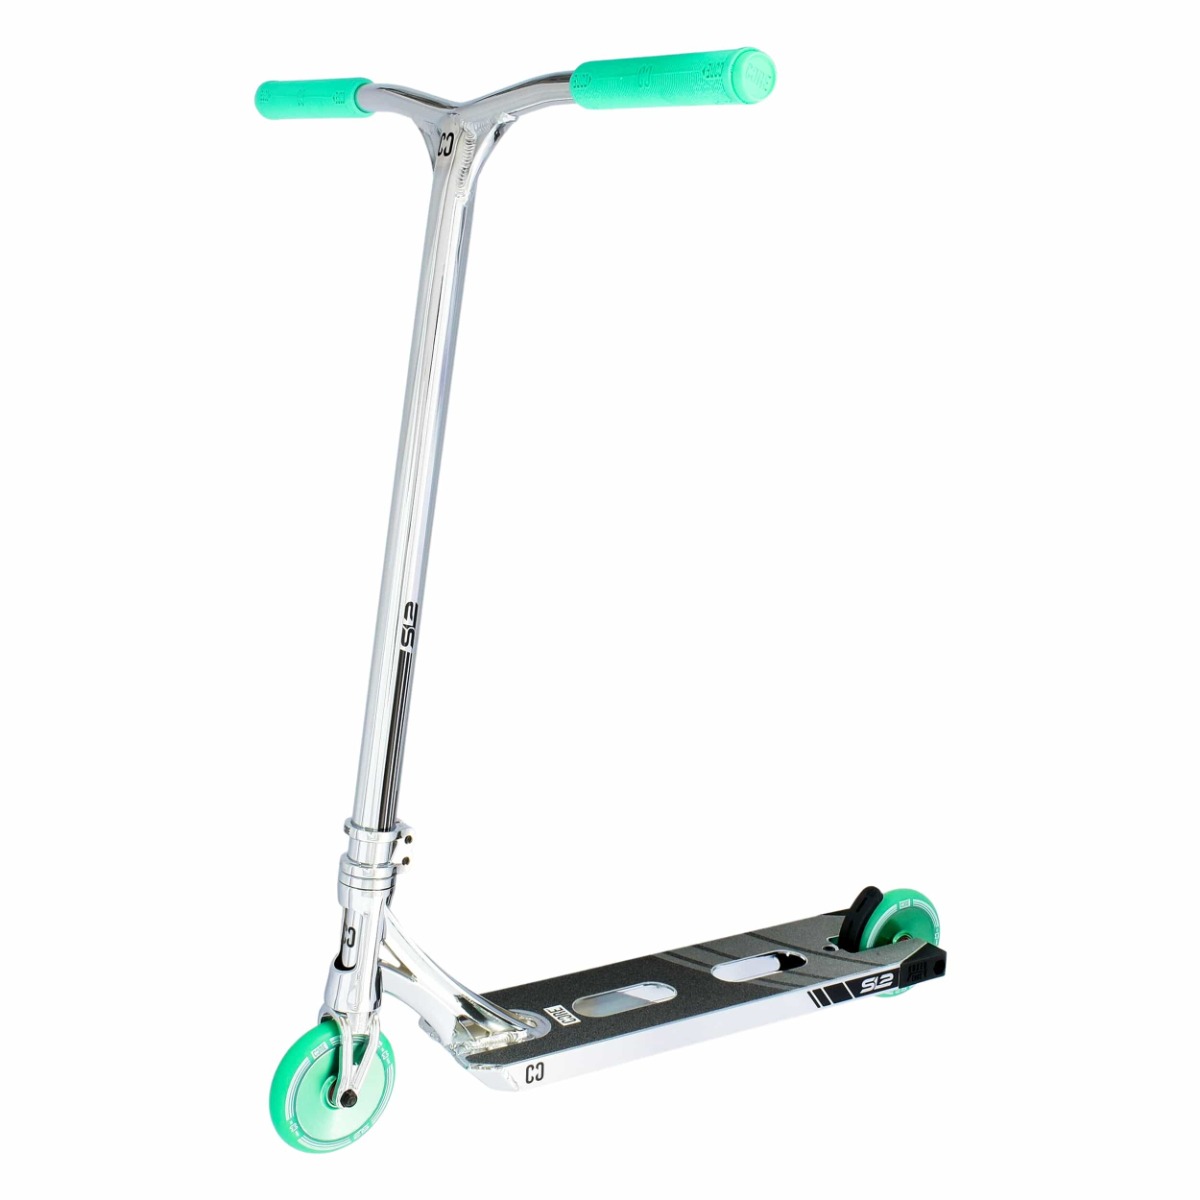 An image of CORE SL2 Complete Stunt Scooter - Chrome / Teal